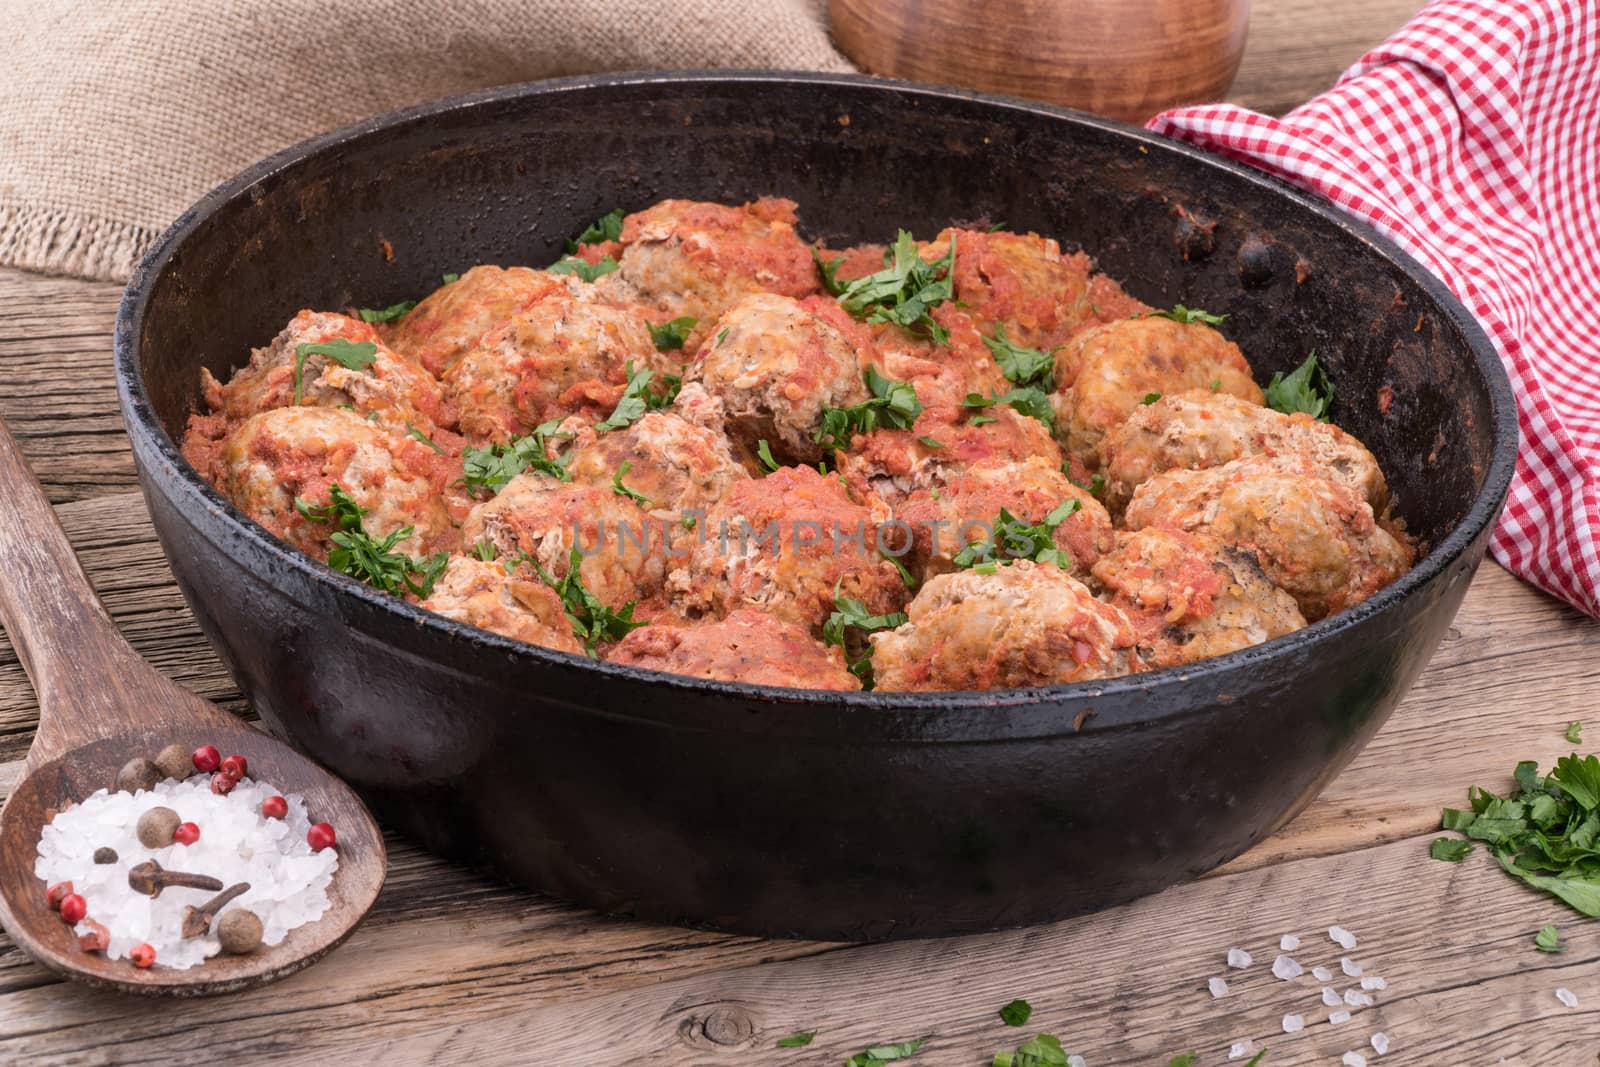 meat balls with herbs in pan on wooden rustic background.  by DGolbay